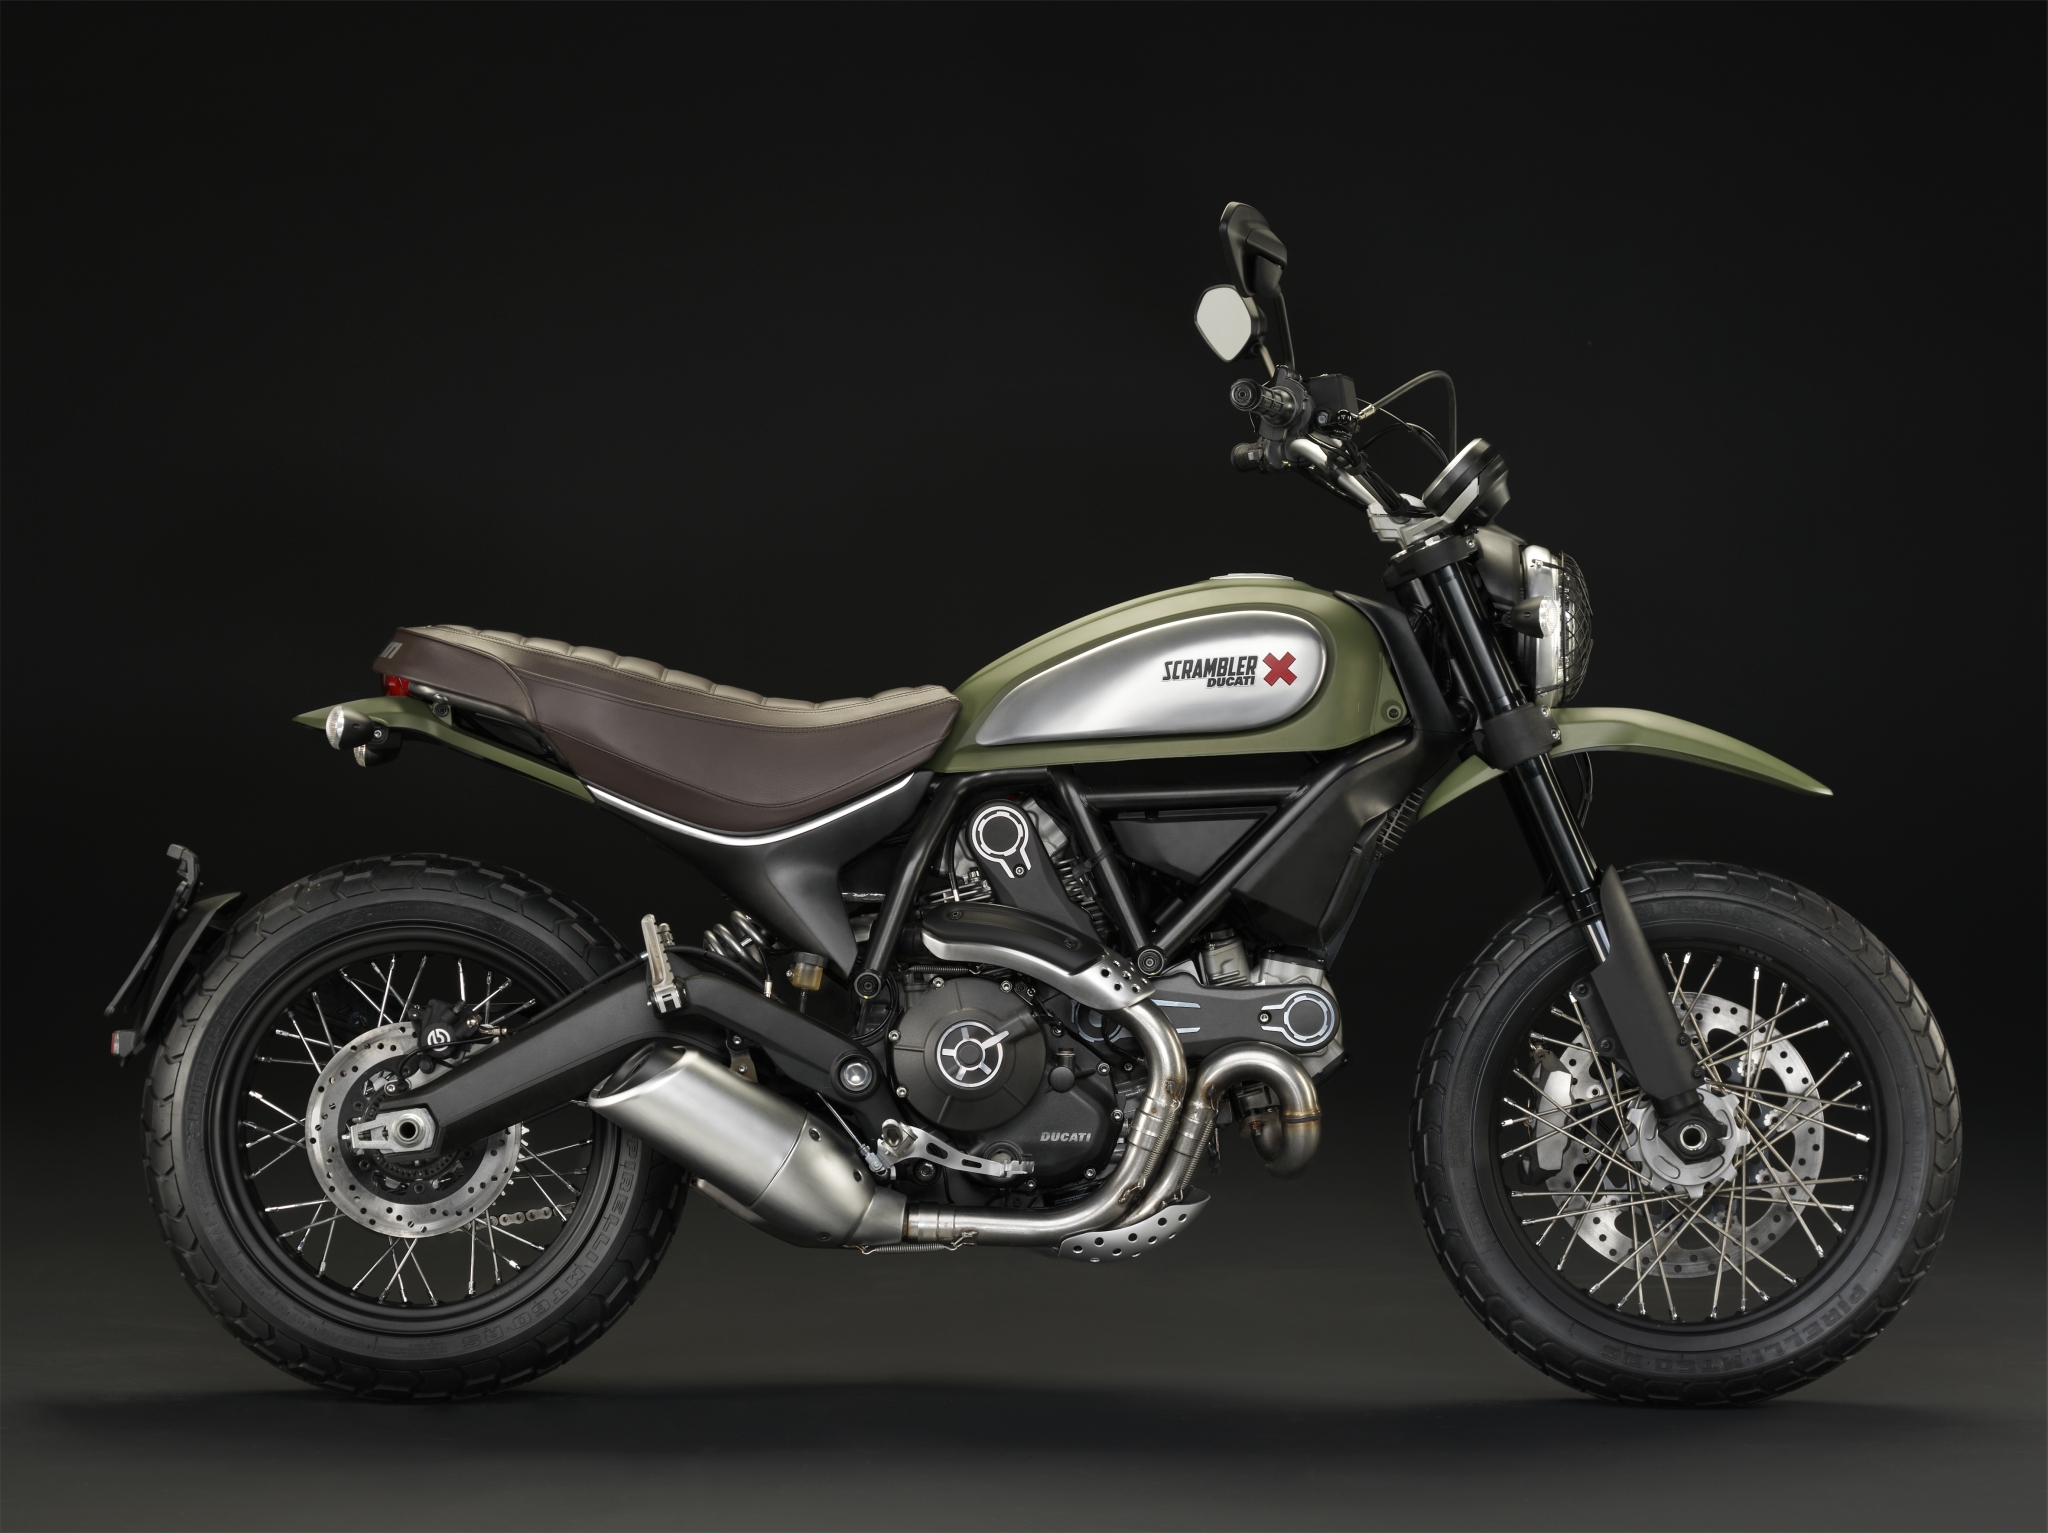 75 Pics of the 2015 Ducati Scrambler and It Doesn't Look Bad at All